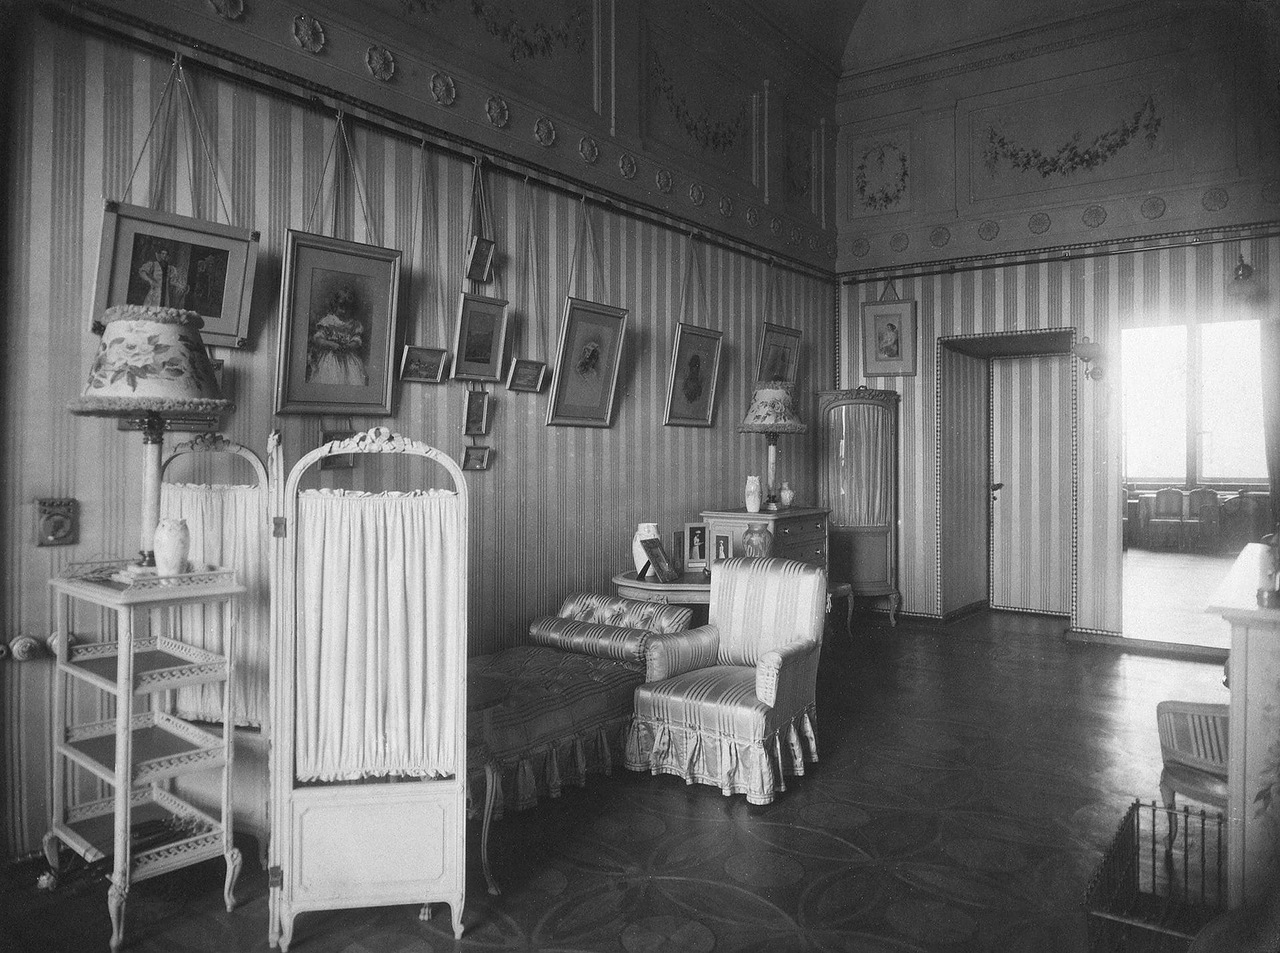 In January 1920, the State Museum of Revolution was opened in the Winter Palace. It shared the building with the State Hermitage right up until 1941. Currently, the Winter Palace and the Hermitage Museum are one of the most popular attractions for tourists from around the world. / Empress Alexandra Fedorovna’s bedroom.